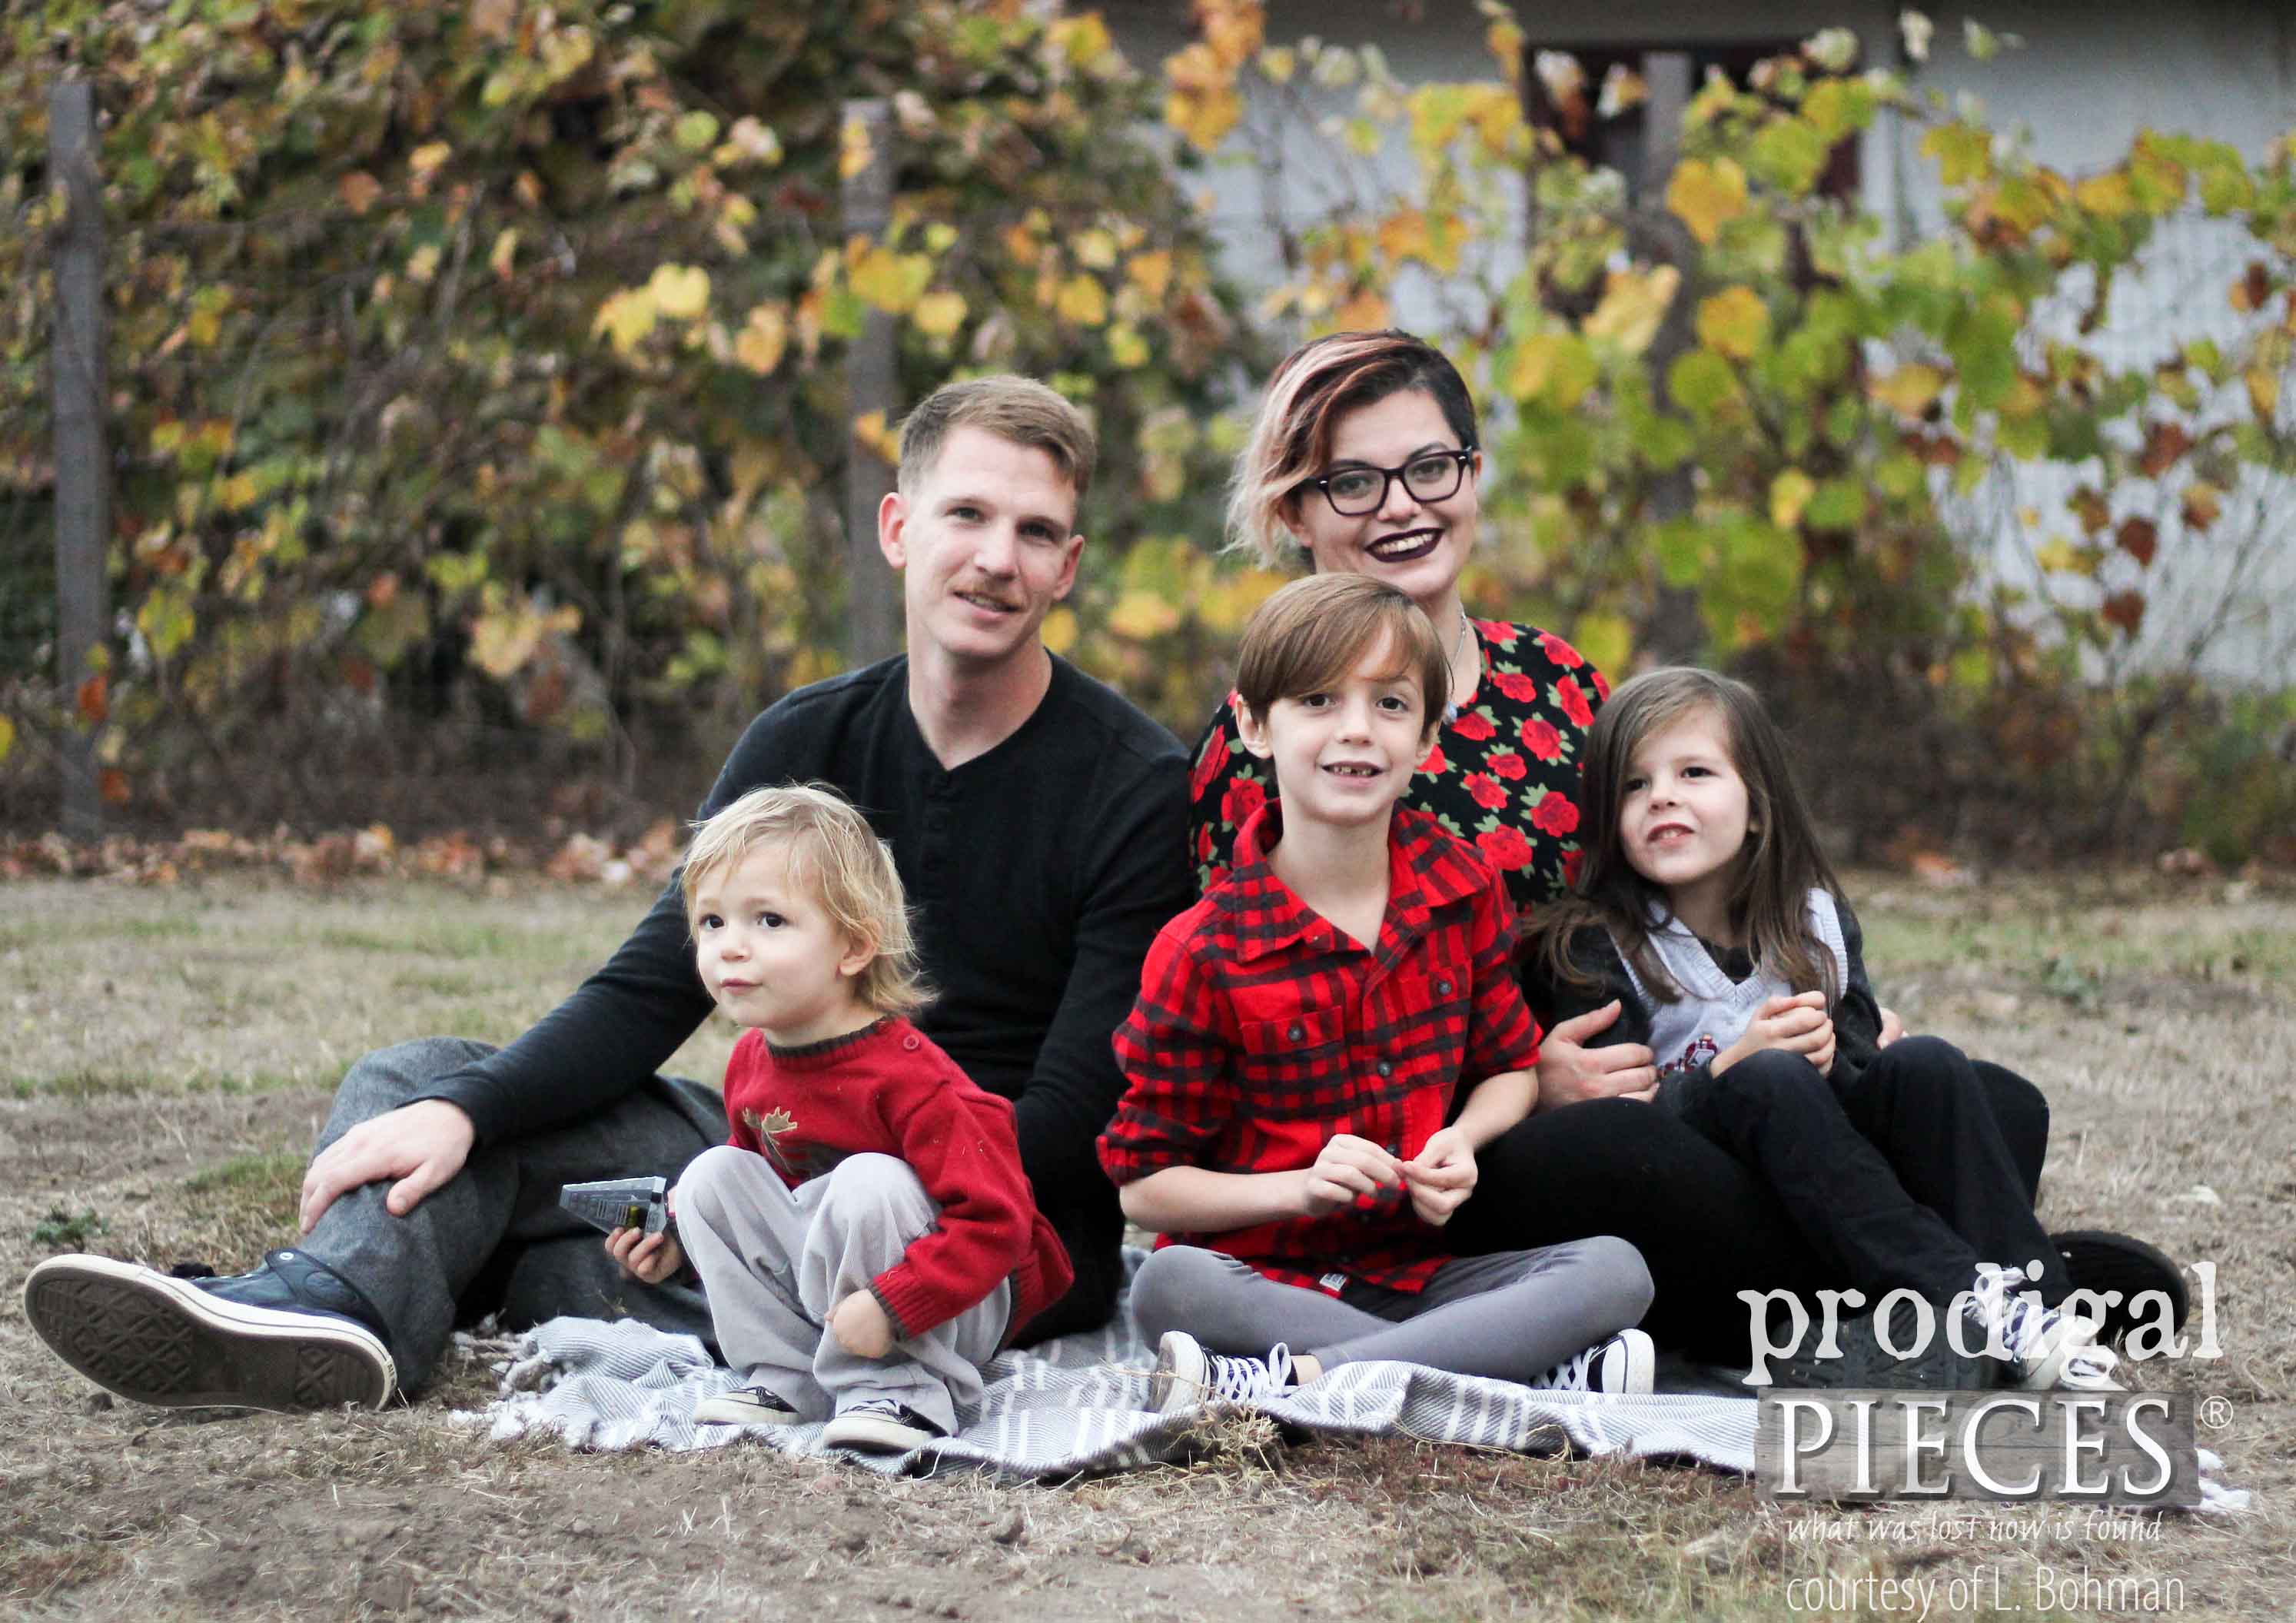 Taylor Family Honored by the Prodigal Pieces Finding Home Program Triple Gift | prodigalpieces.com